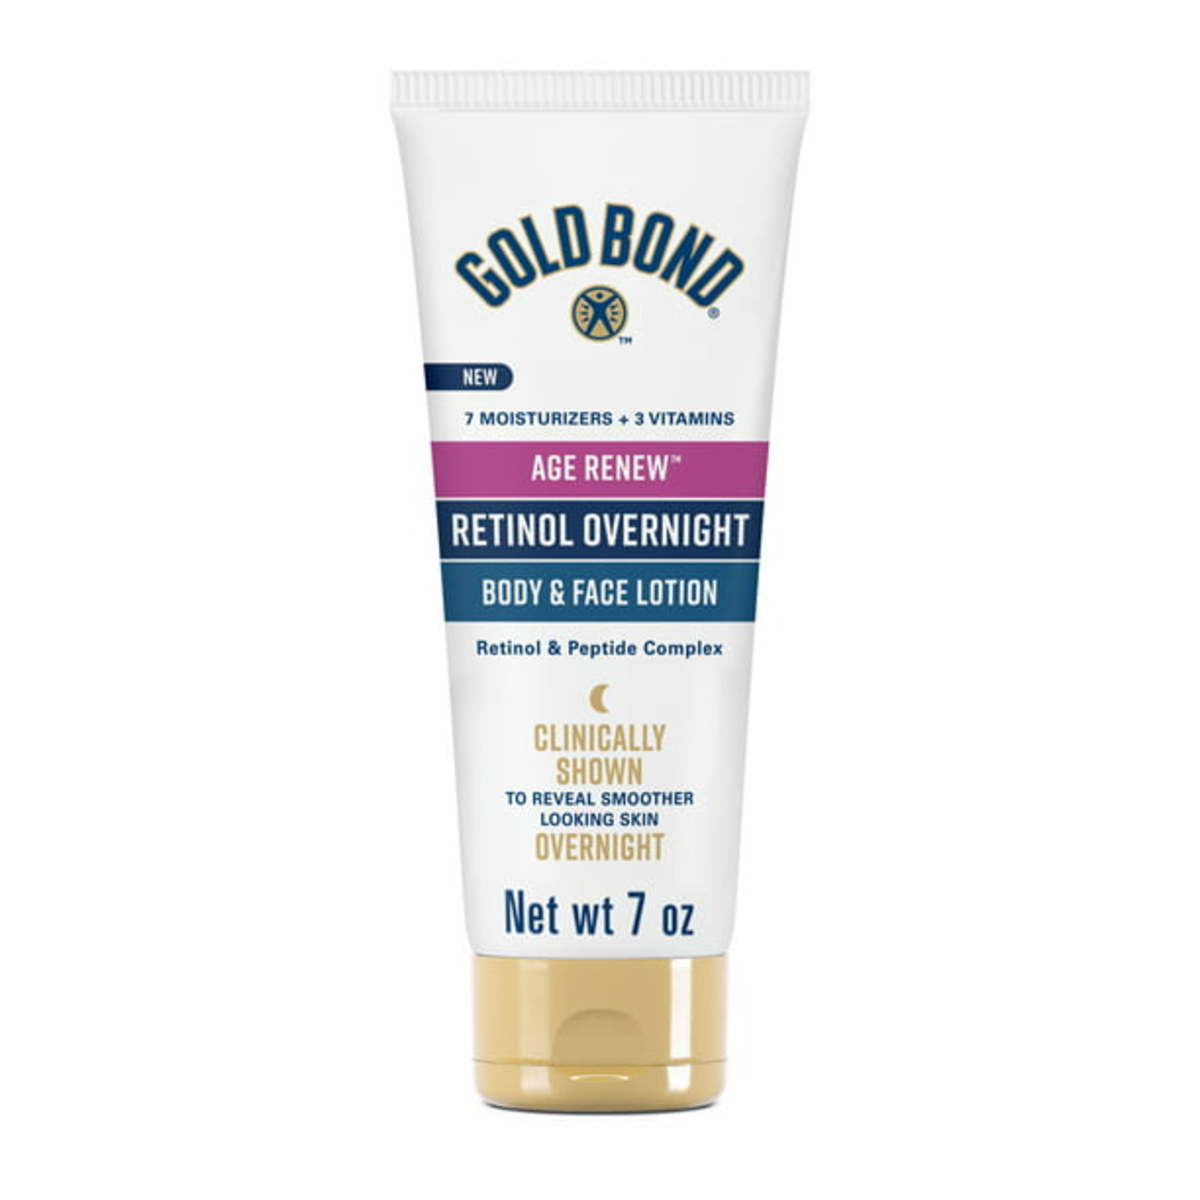 Gold Bond Age Renew Retinol Overnight Body & Face Lotion, $12, available here.